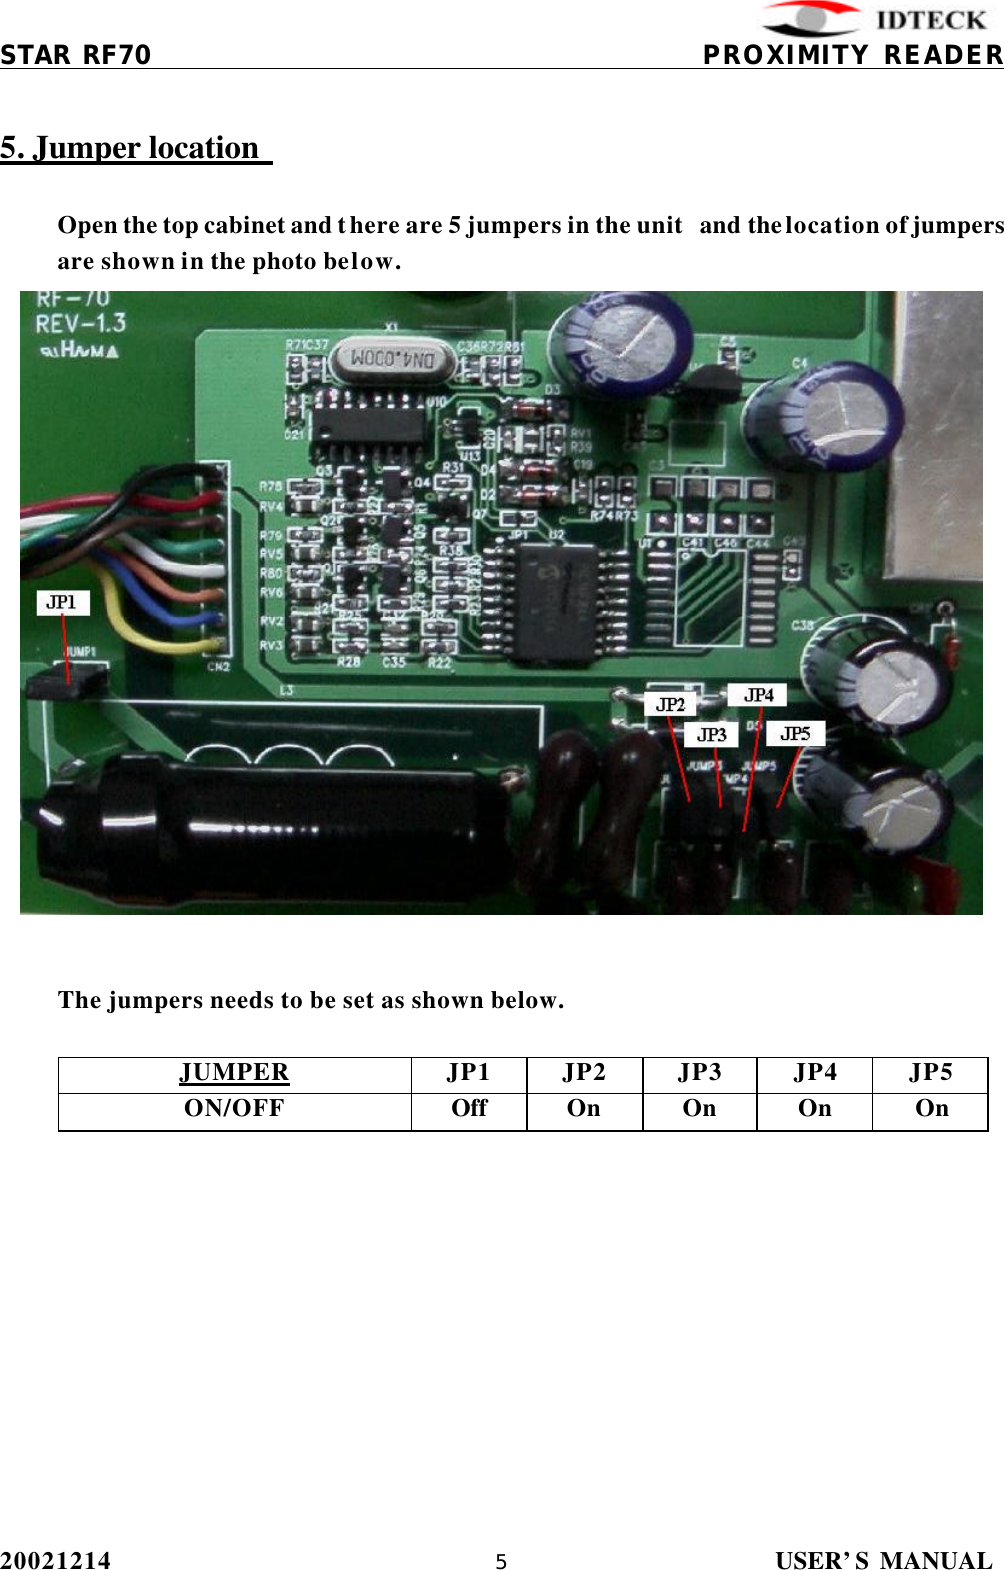          STAR RF70                                           PROXIMITY READER 20021214                USER’S MANUAL 5  5. Jumper location    Open the top cabinet and there are 5 jumpers in the unit  and the location of jumpers are shown in the photo below.                    The jumpers needs to be set as shown below.  JUMPER JP1 JP2 JP3 JP4 JP5 ON/OFF Off On On On On   